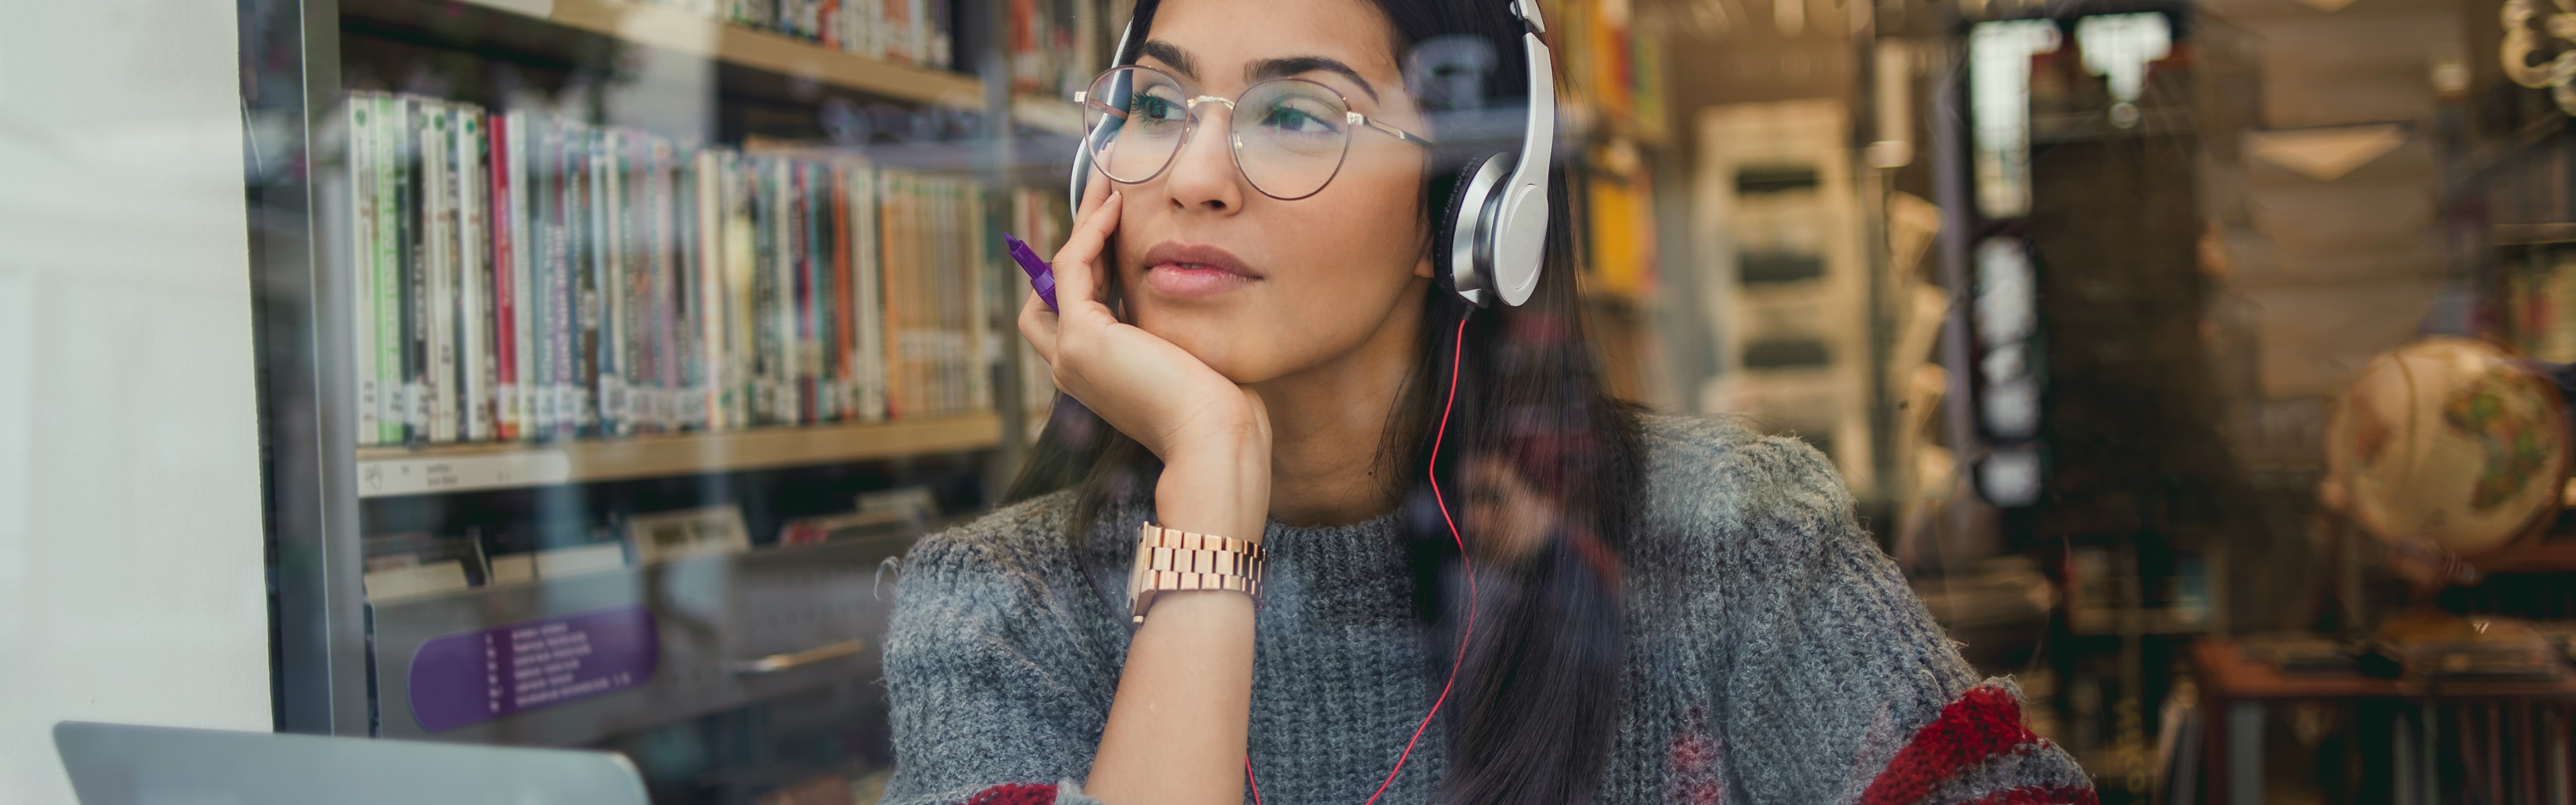 A student wearing headphones gazes over her laptop as she studies in the library.